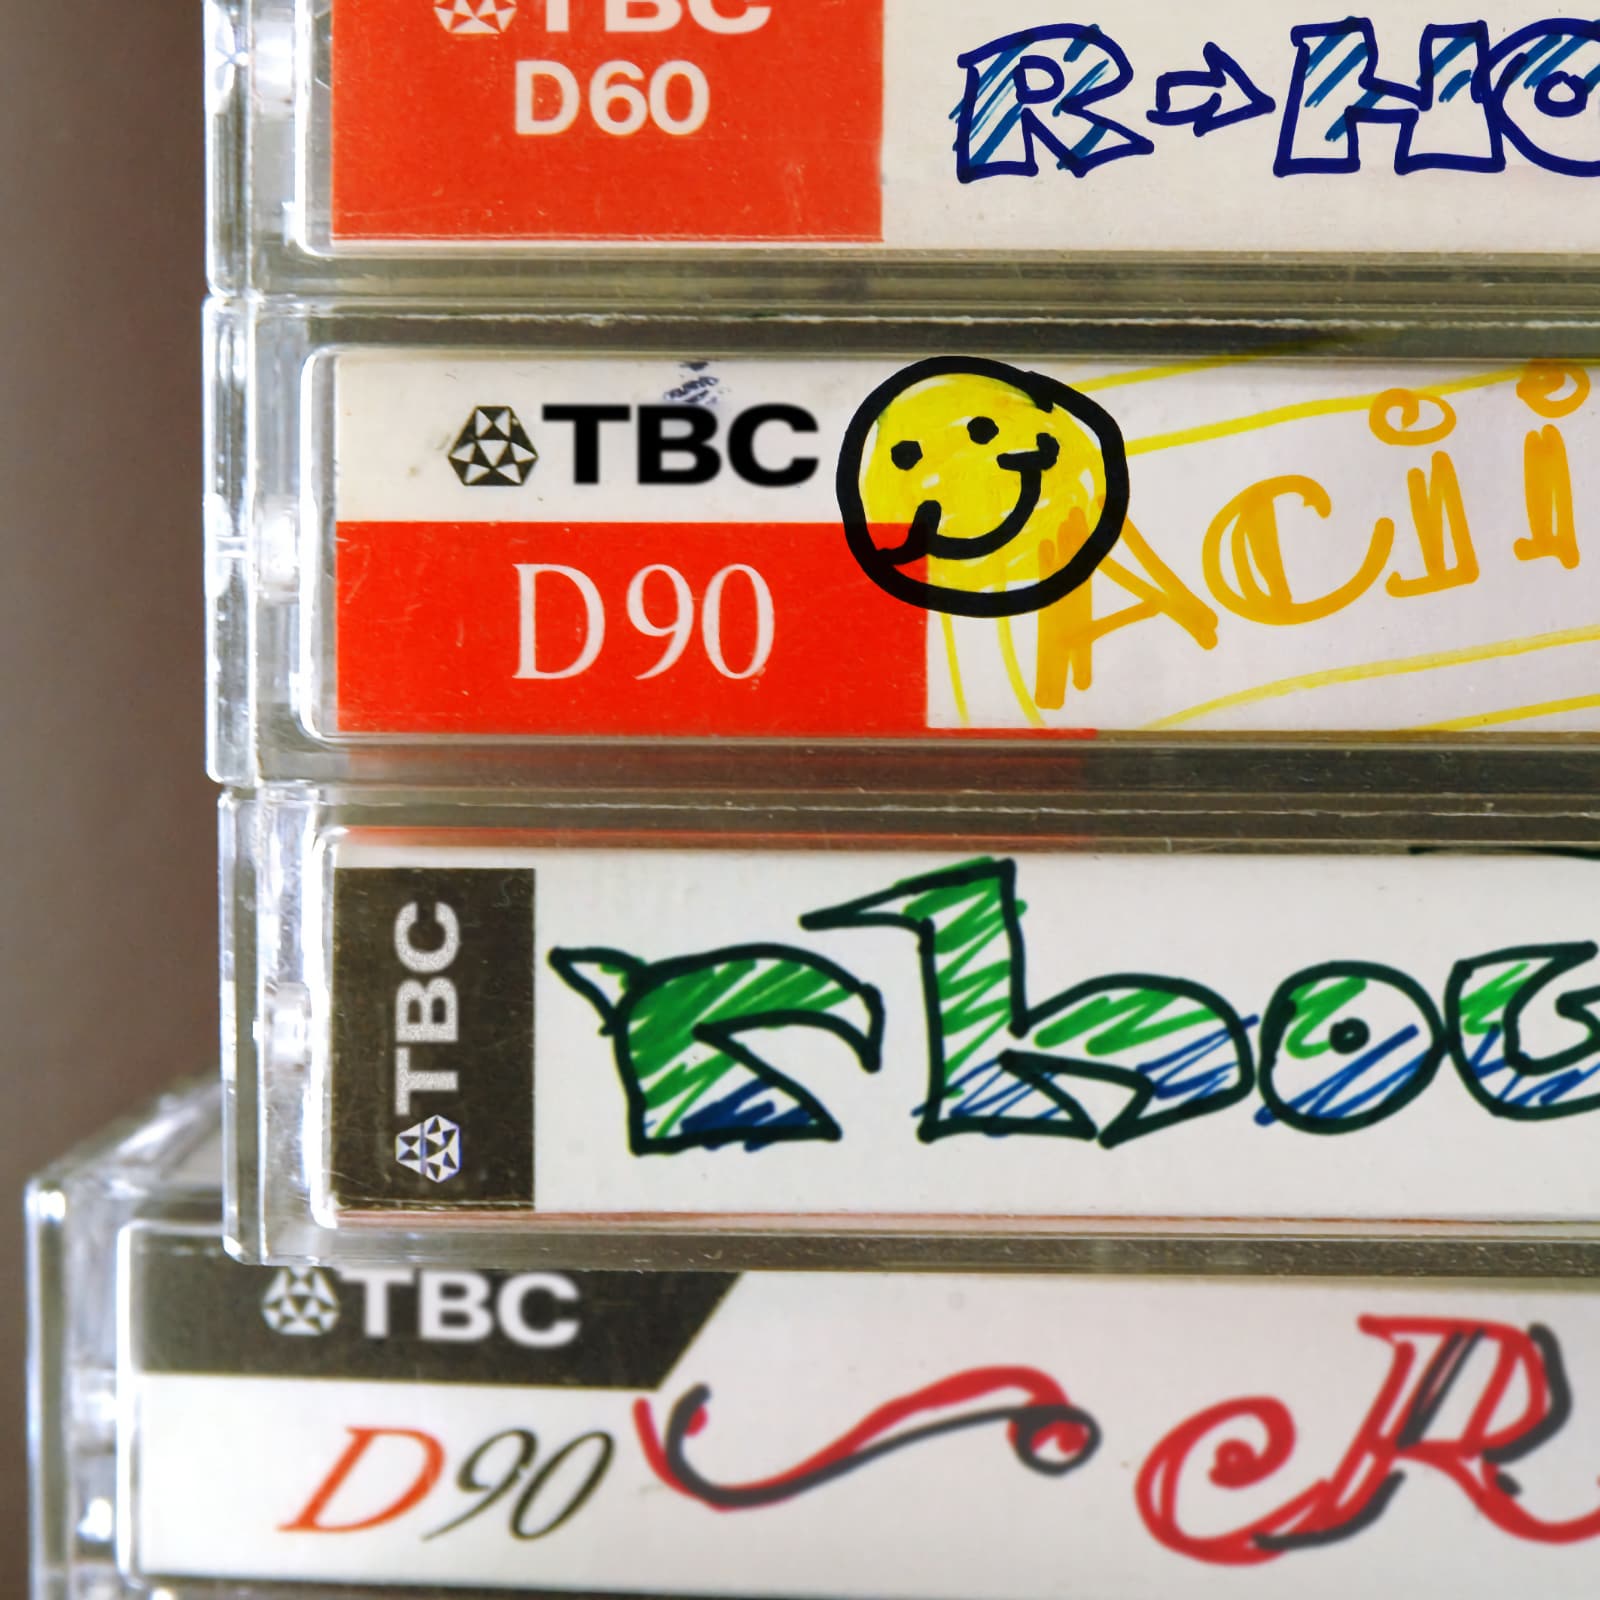 R House cover hip house mix cover is TDK cassettes in a stack